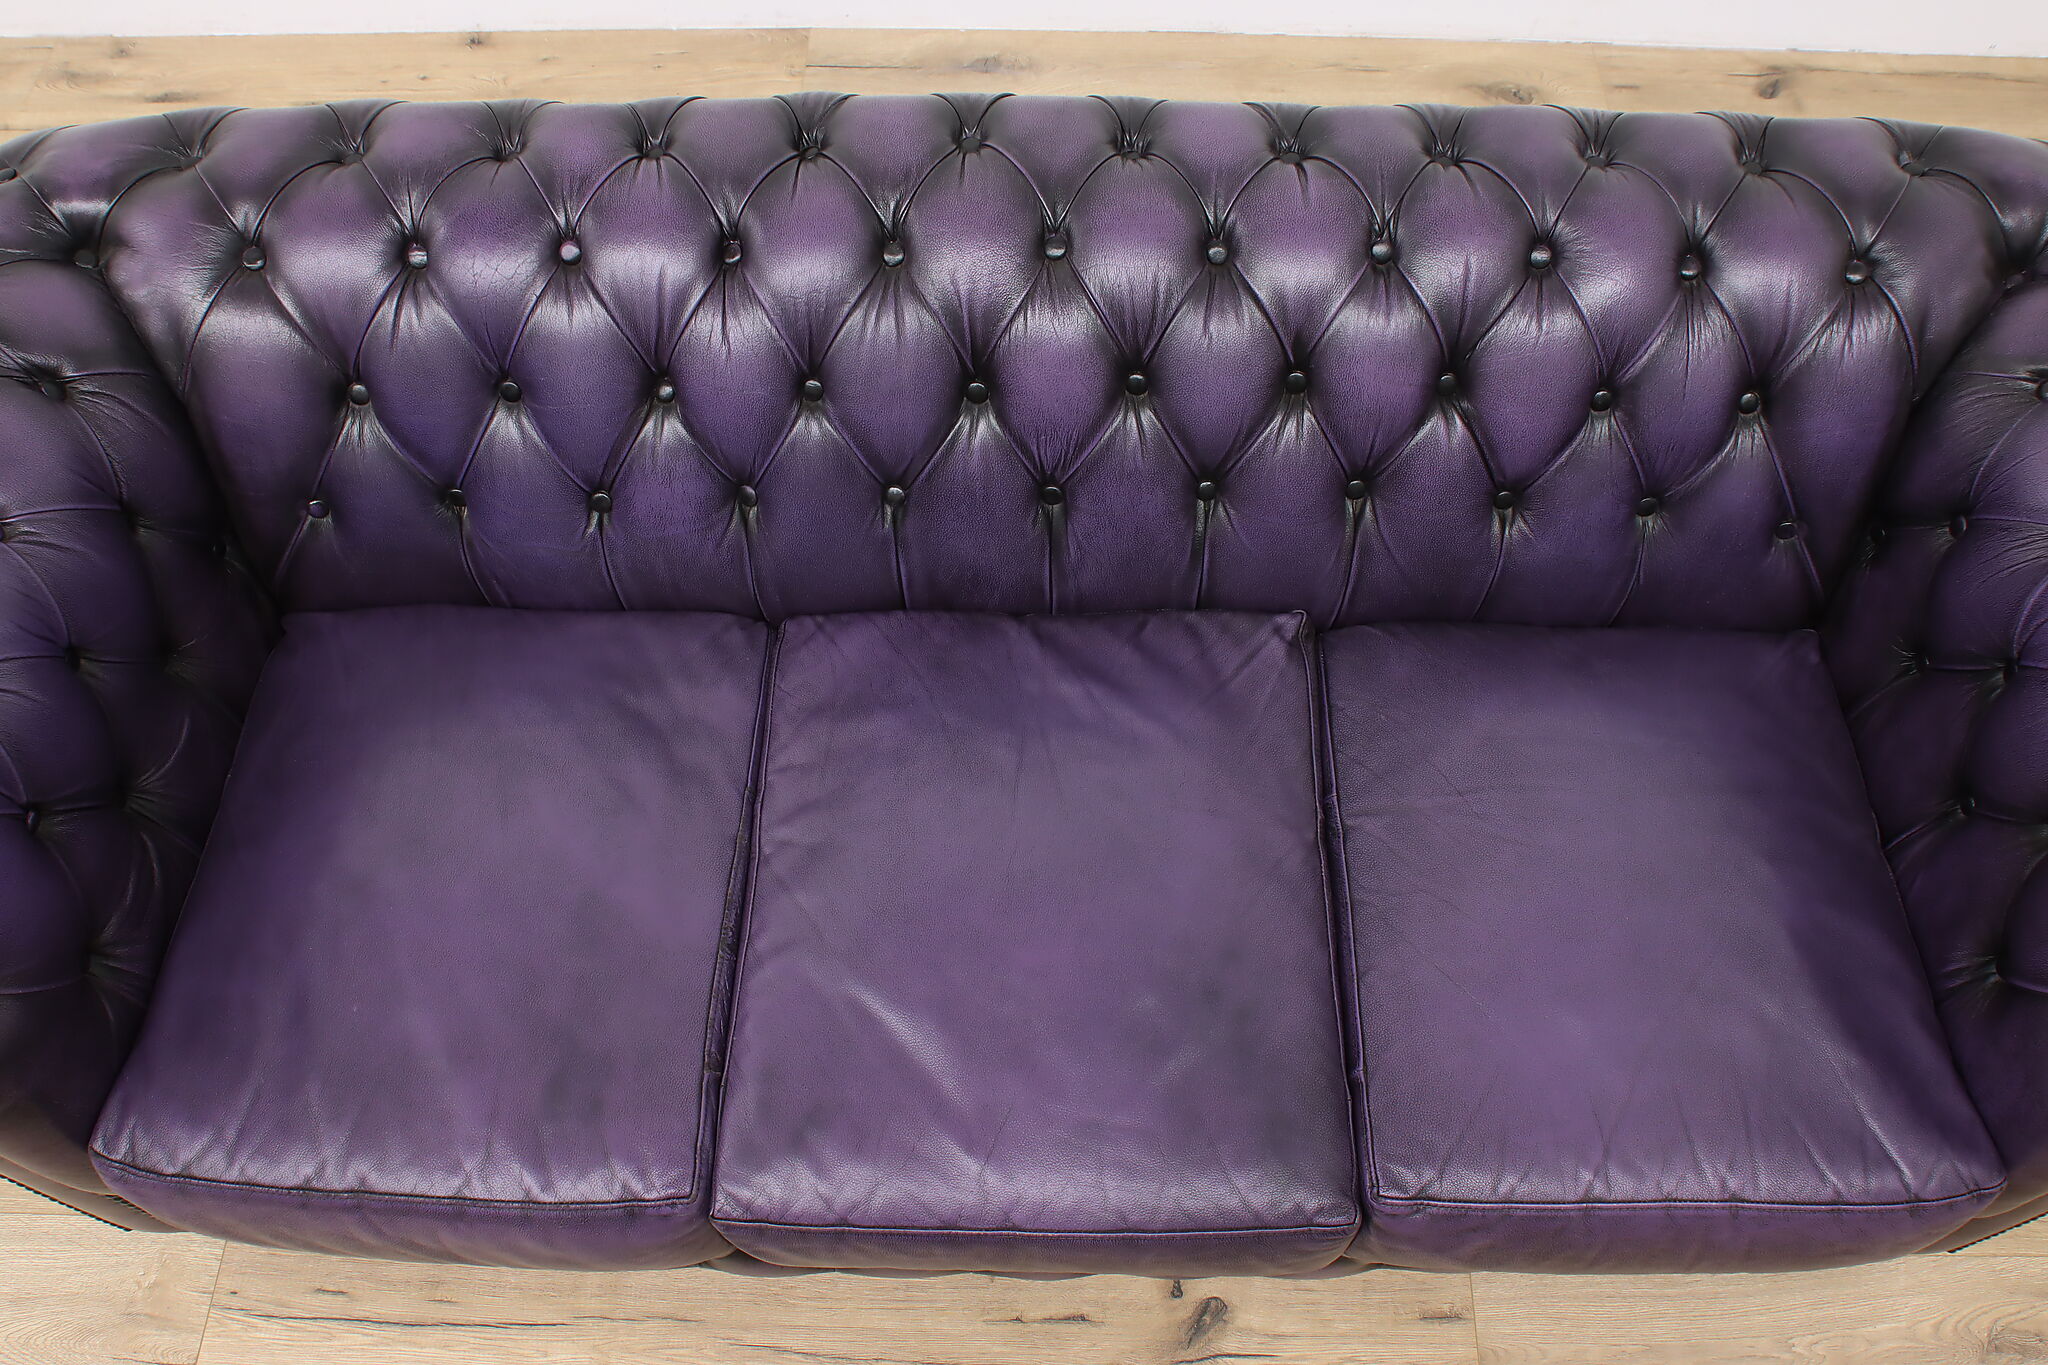 Chesterfield Tufted Purple Leather Vintage 3 Cushion Sofa #46773